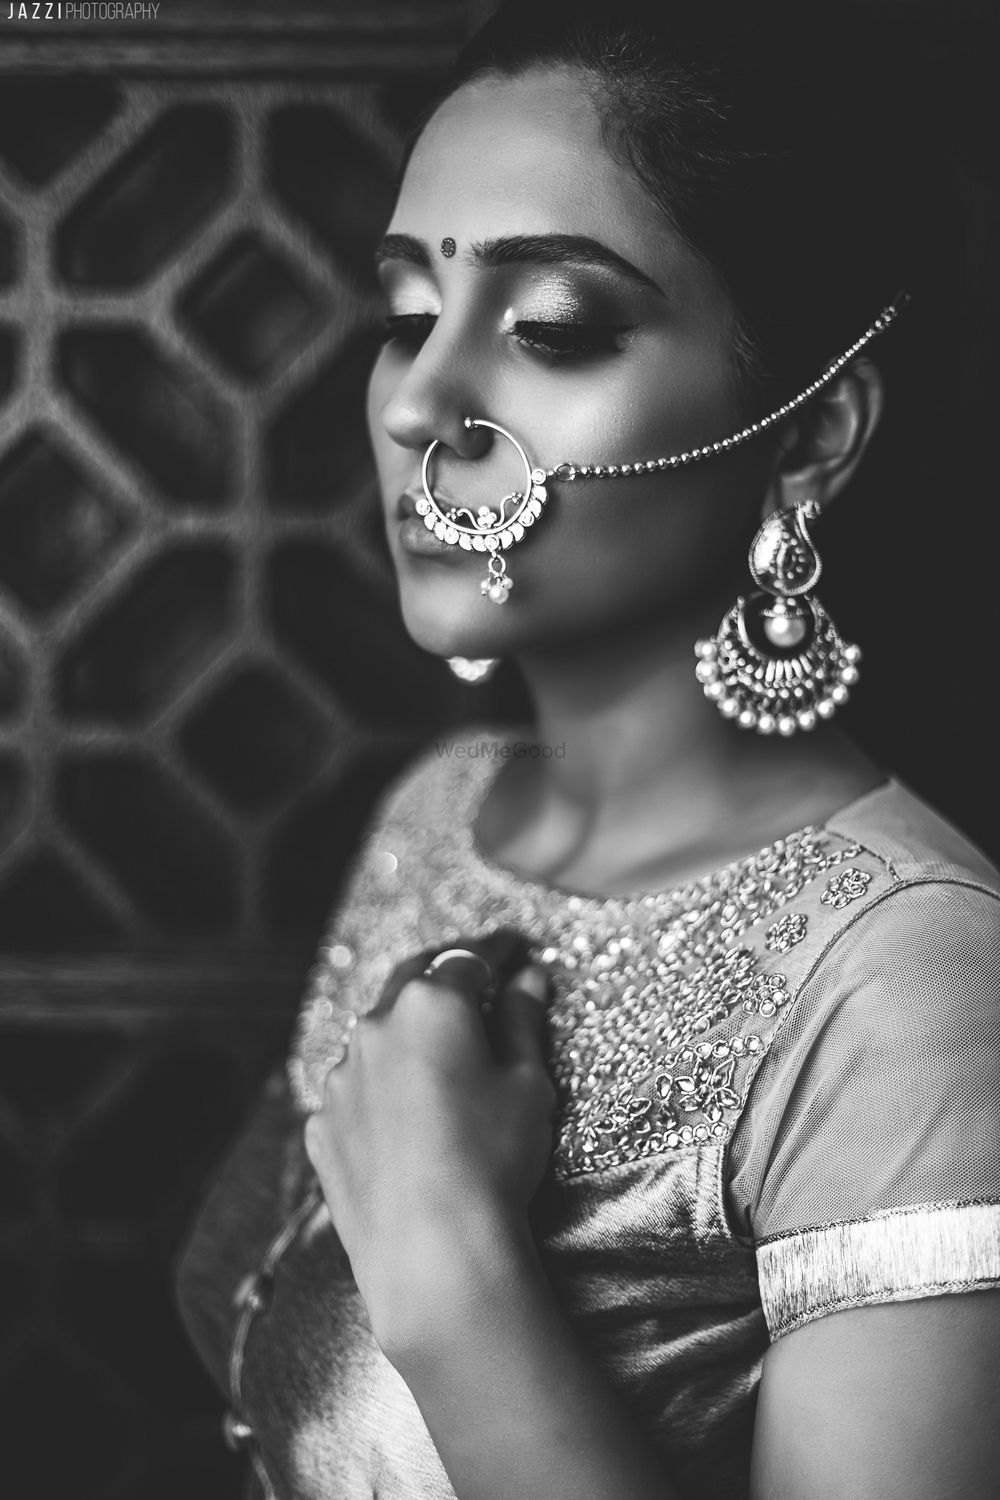 Photo From Subha's Bridal Portrait - By Reflections by Jazzi